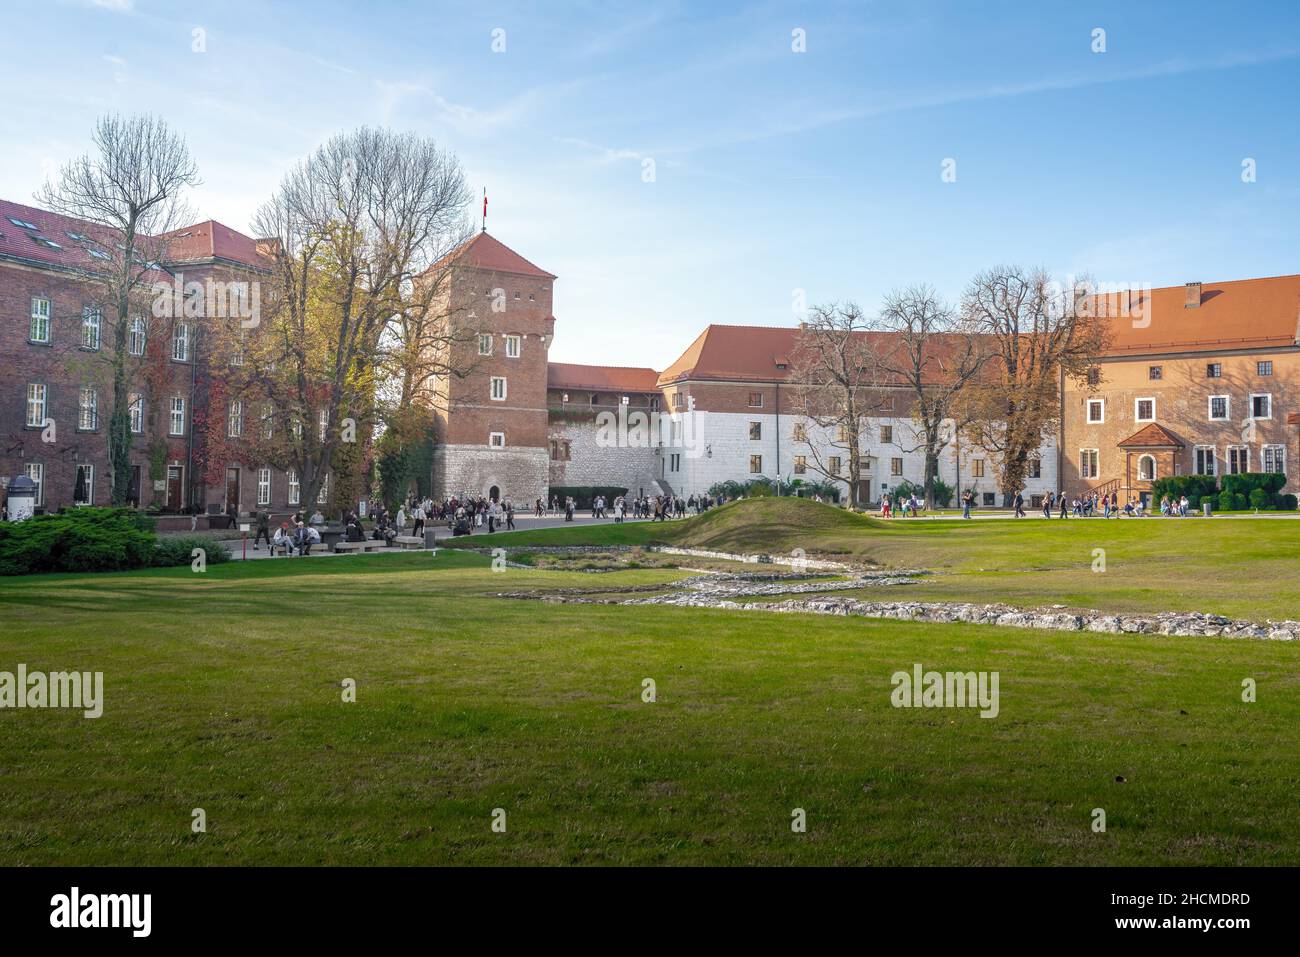 Wawel Castle and Thieves Tower - Krakow, Poland Stock Photo